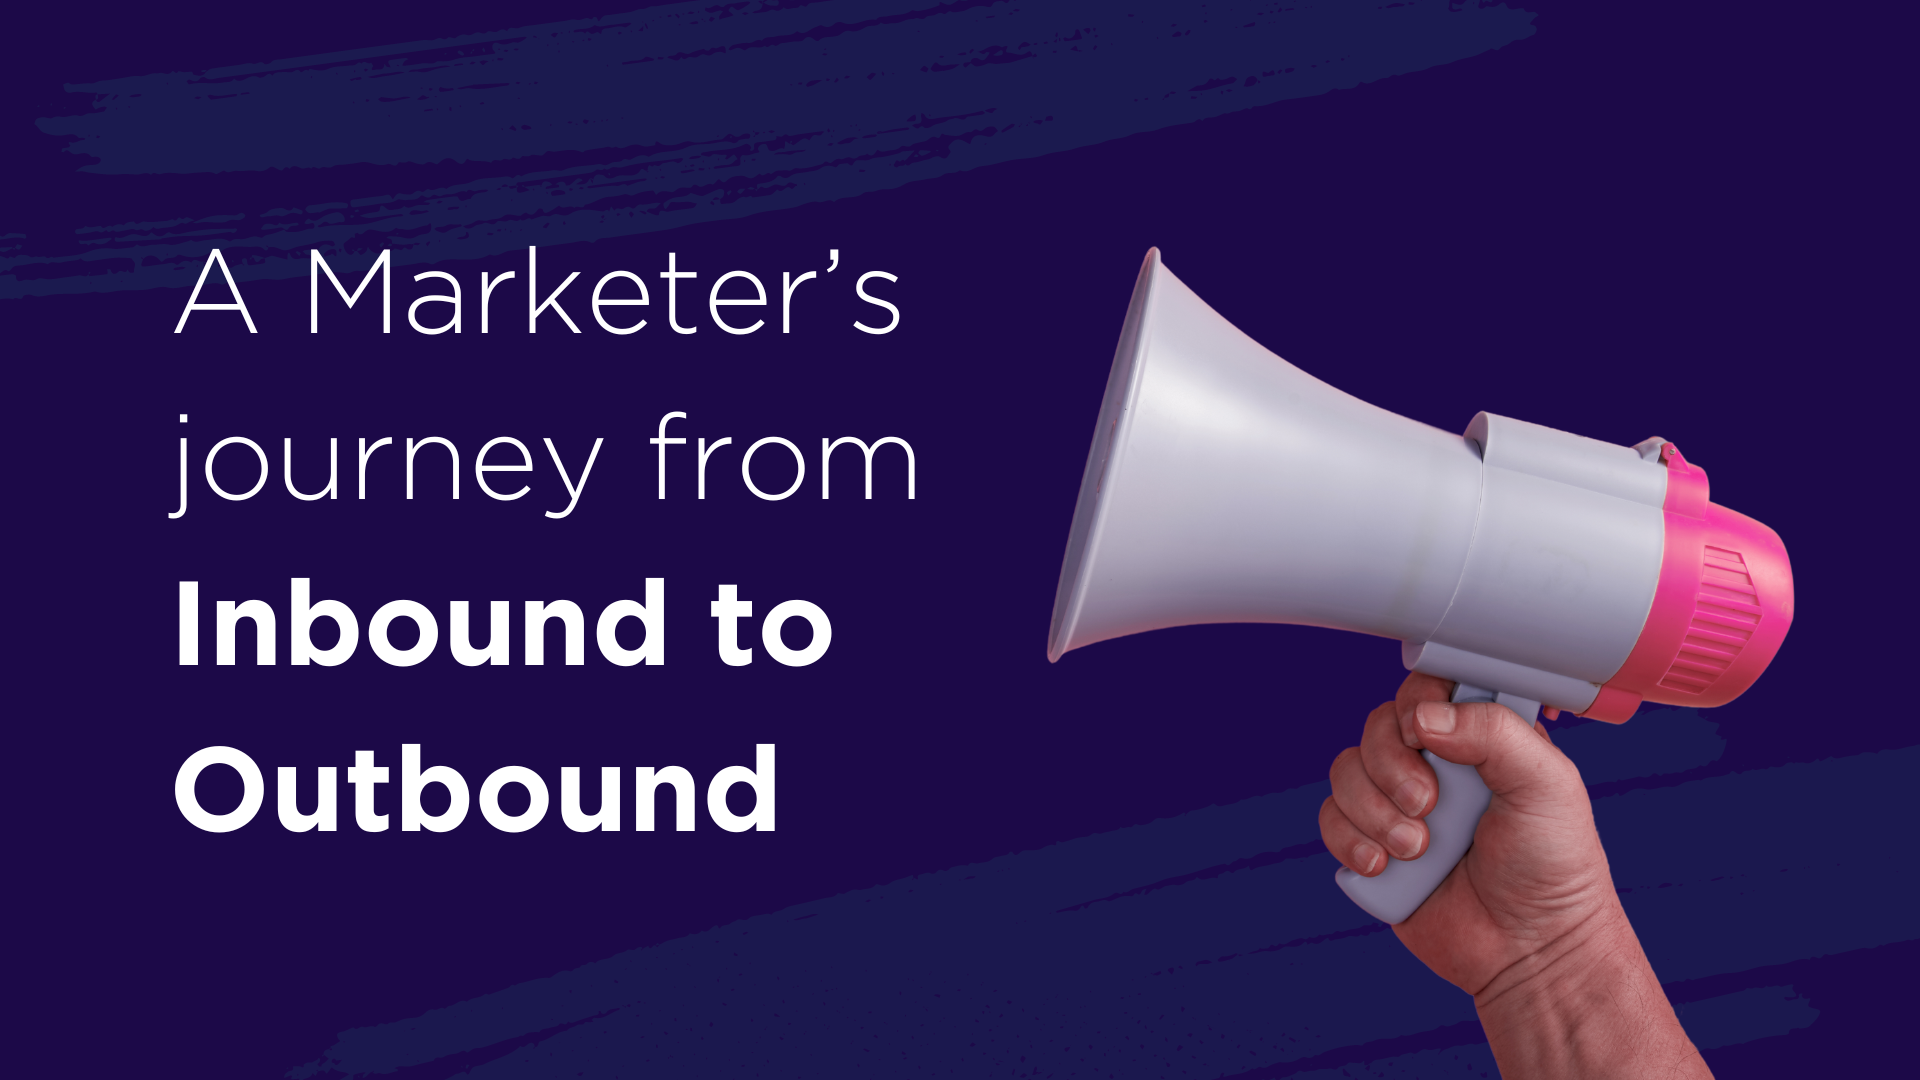 A Marketer’s journey from Inbound to Outbound